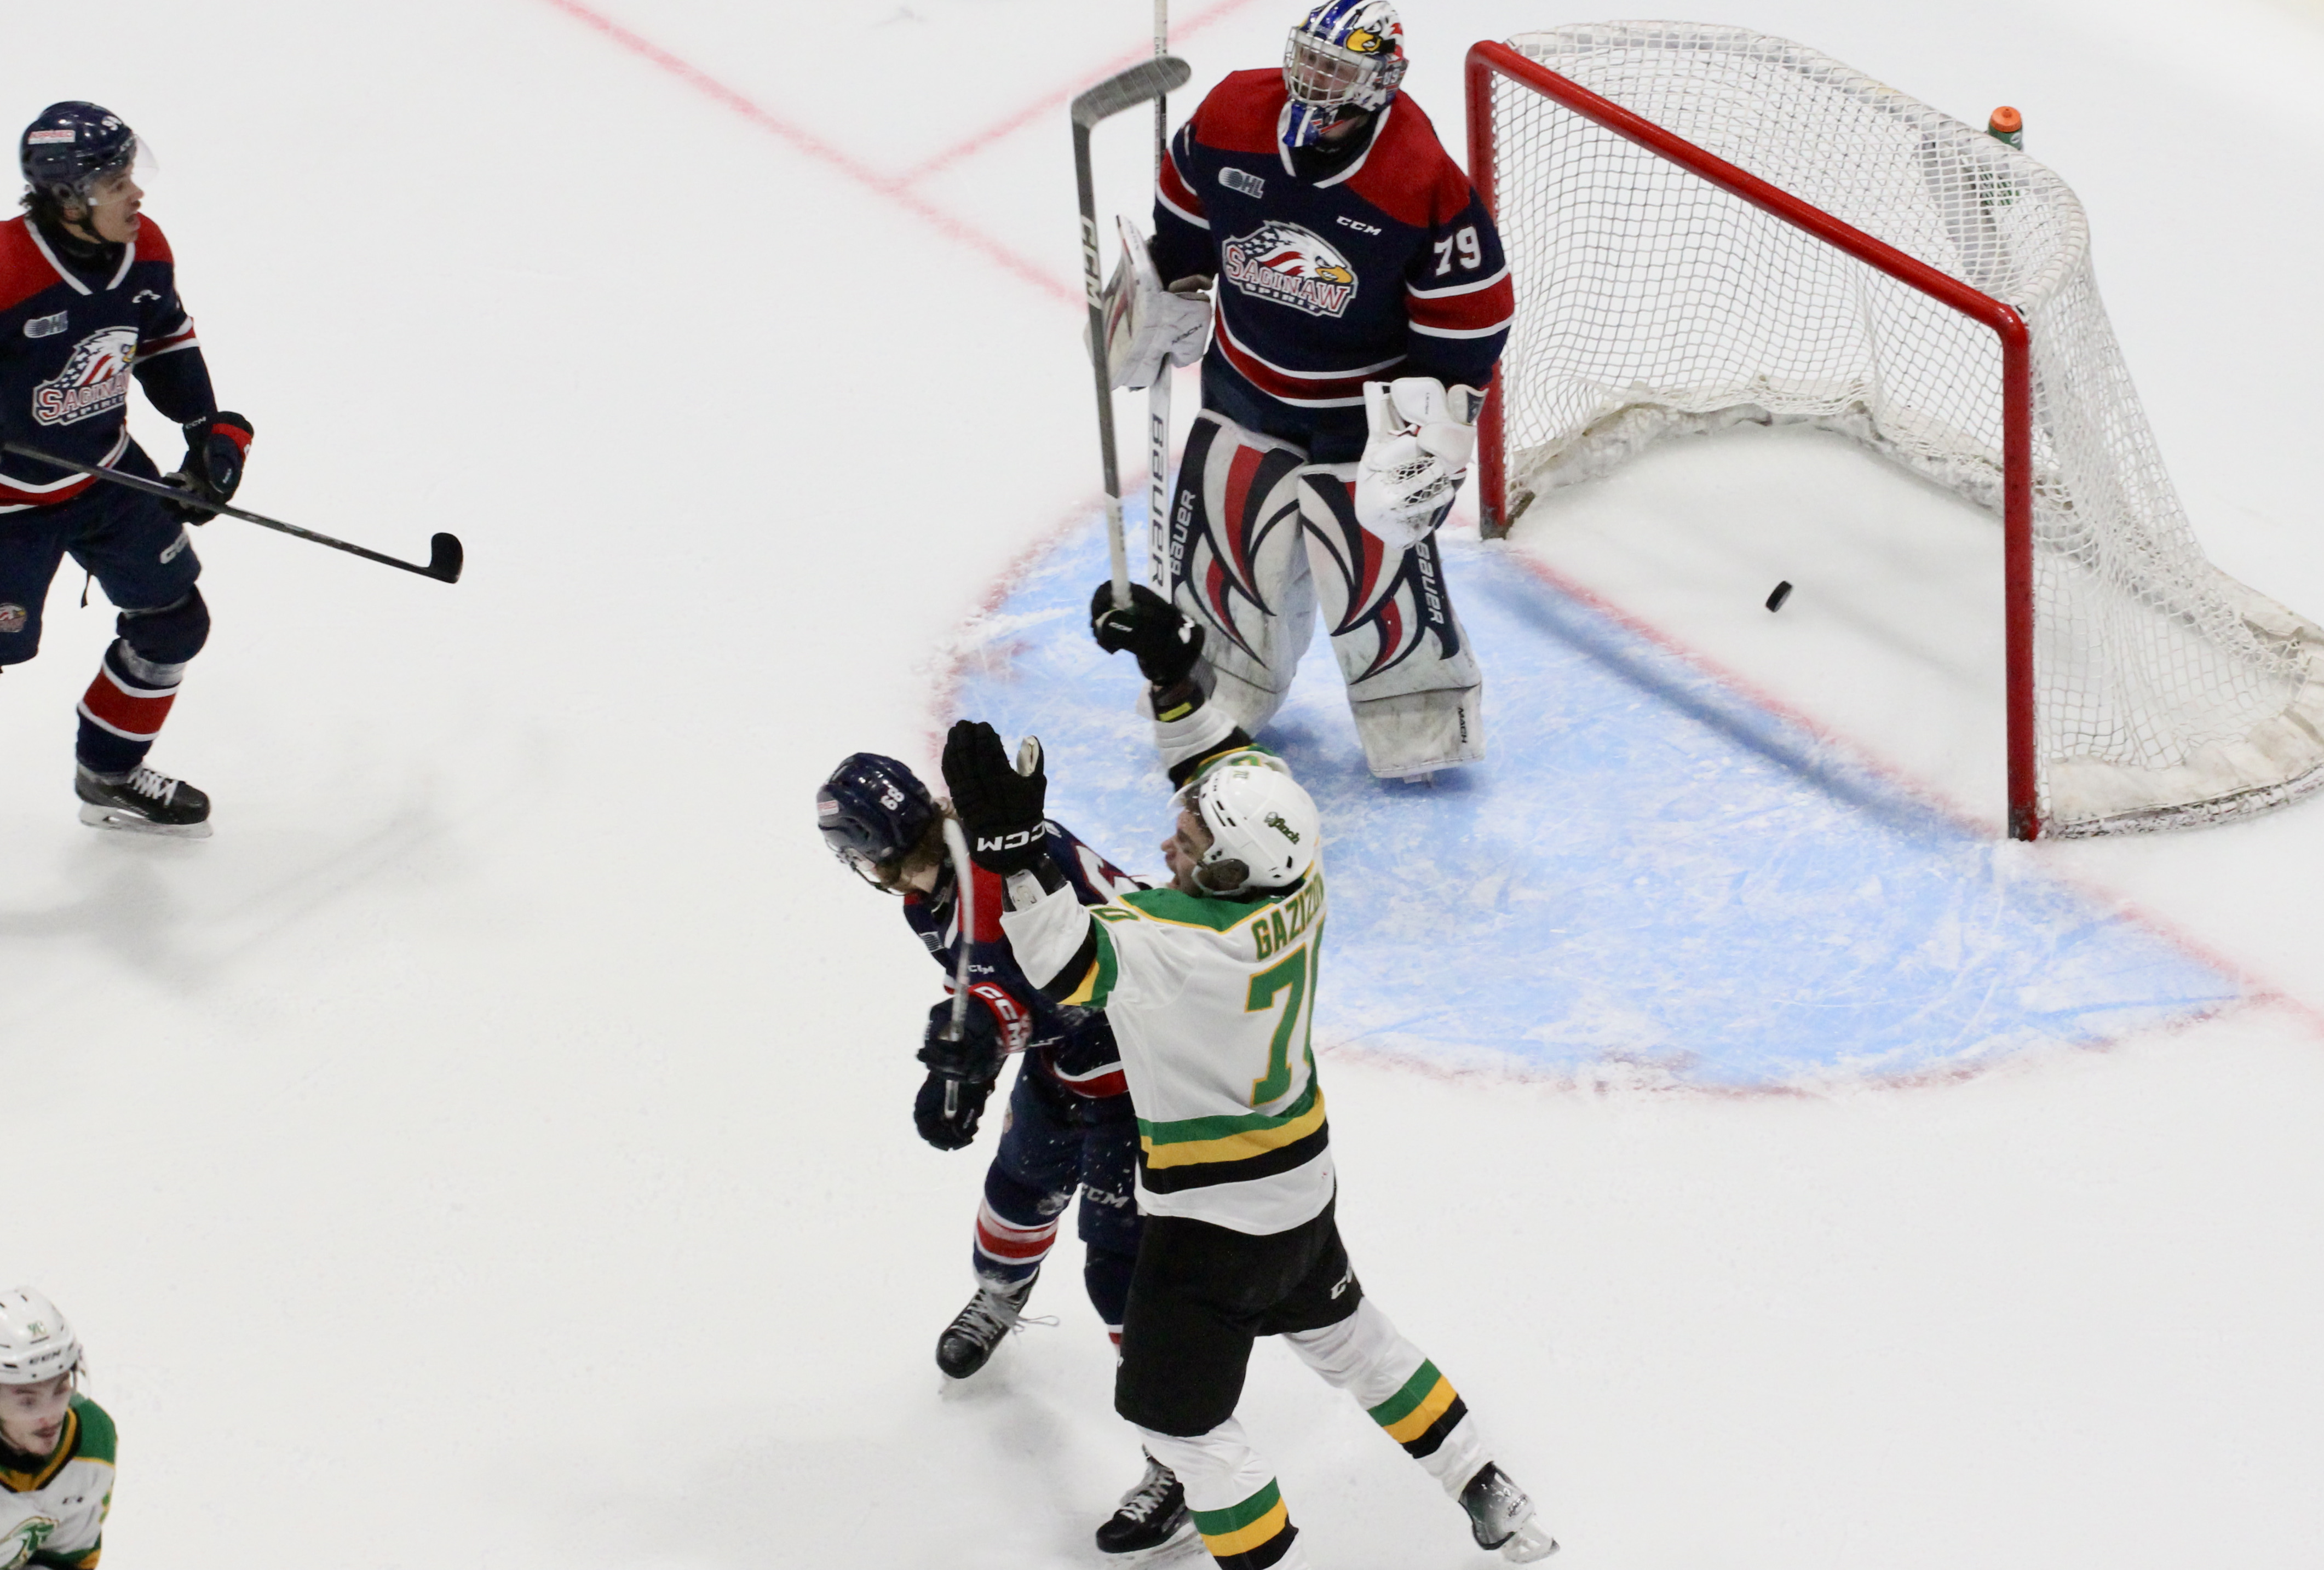 Home ice advantage holds between London Knights and Saginaw as Spirit
win Game 3